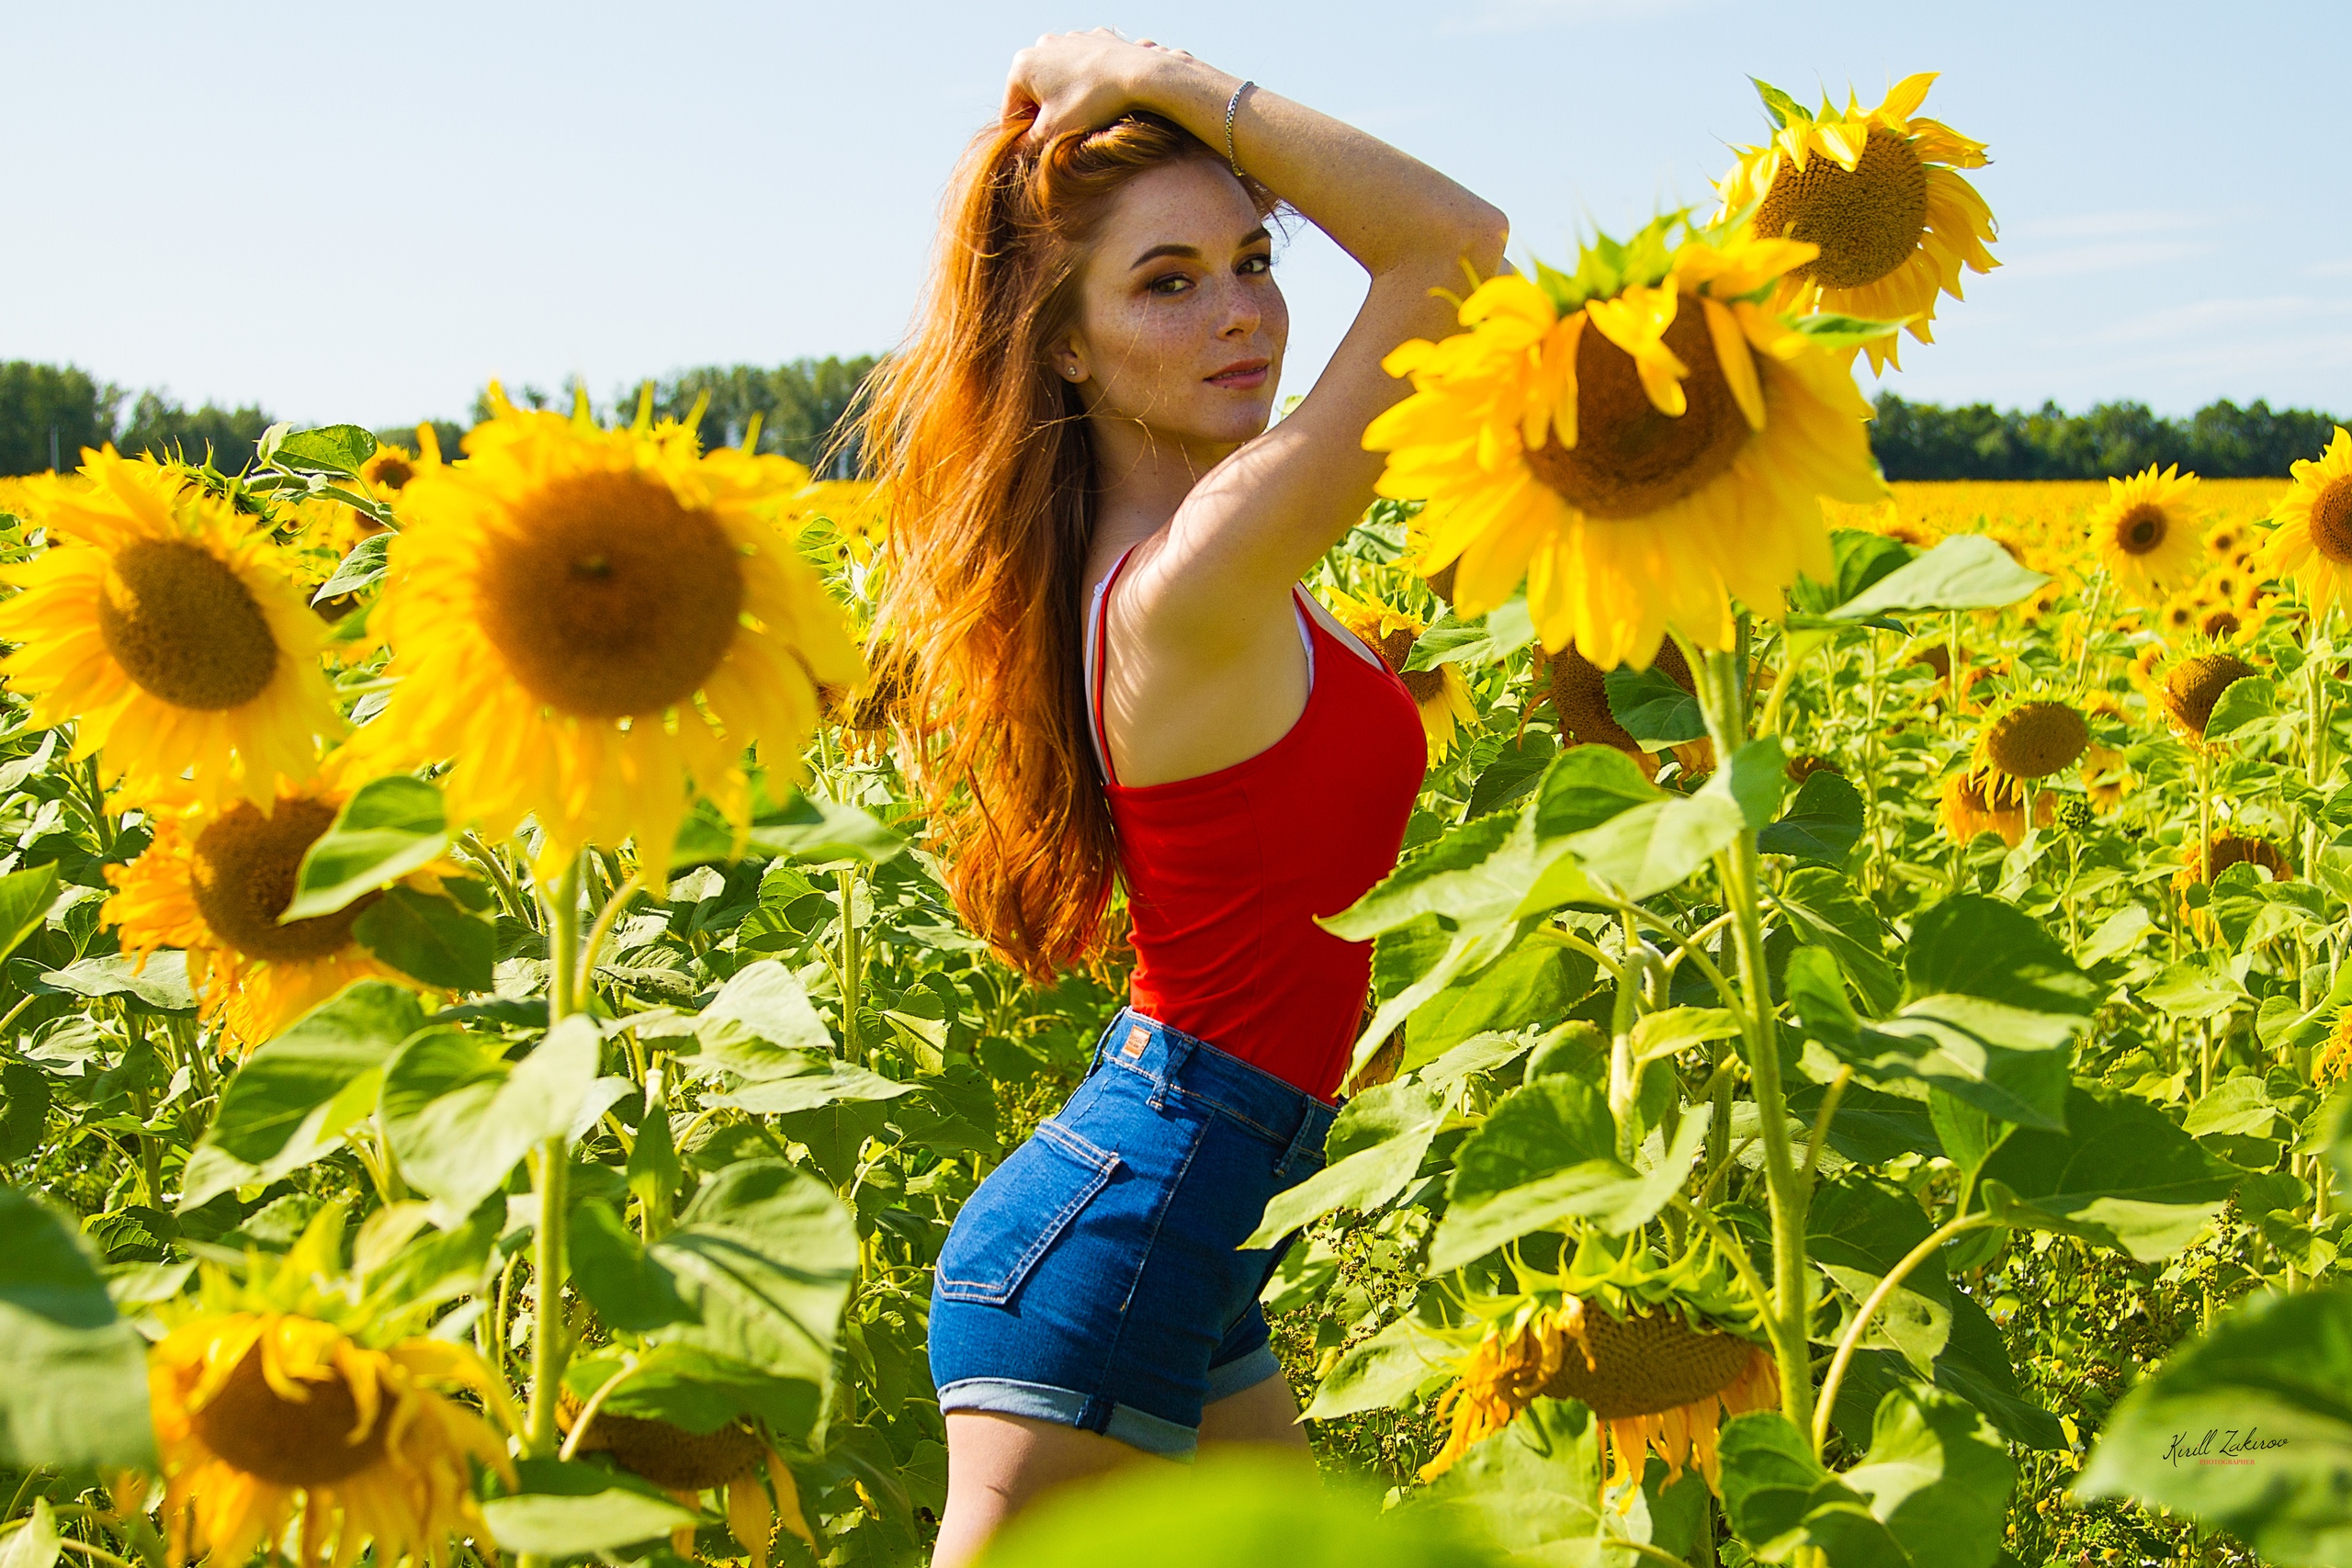 People 2560x1707 Kirill Zakirov women model redhead tank top holding hair sunflowers flowers outdoors jean shorts looking at viewer earring depth of field portrait women outdoors freckles smiling high waisted shorts Alina Nurieva